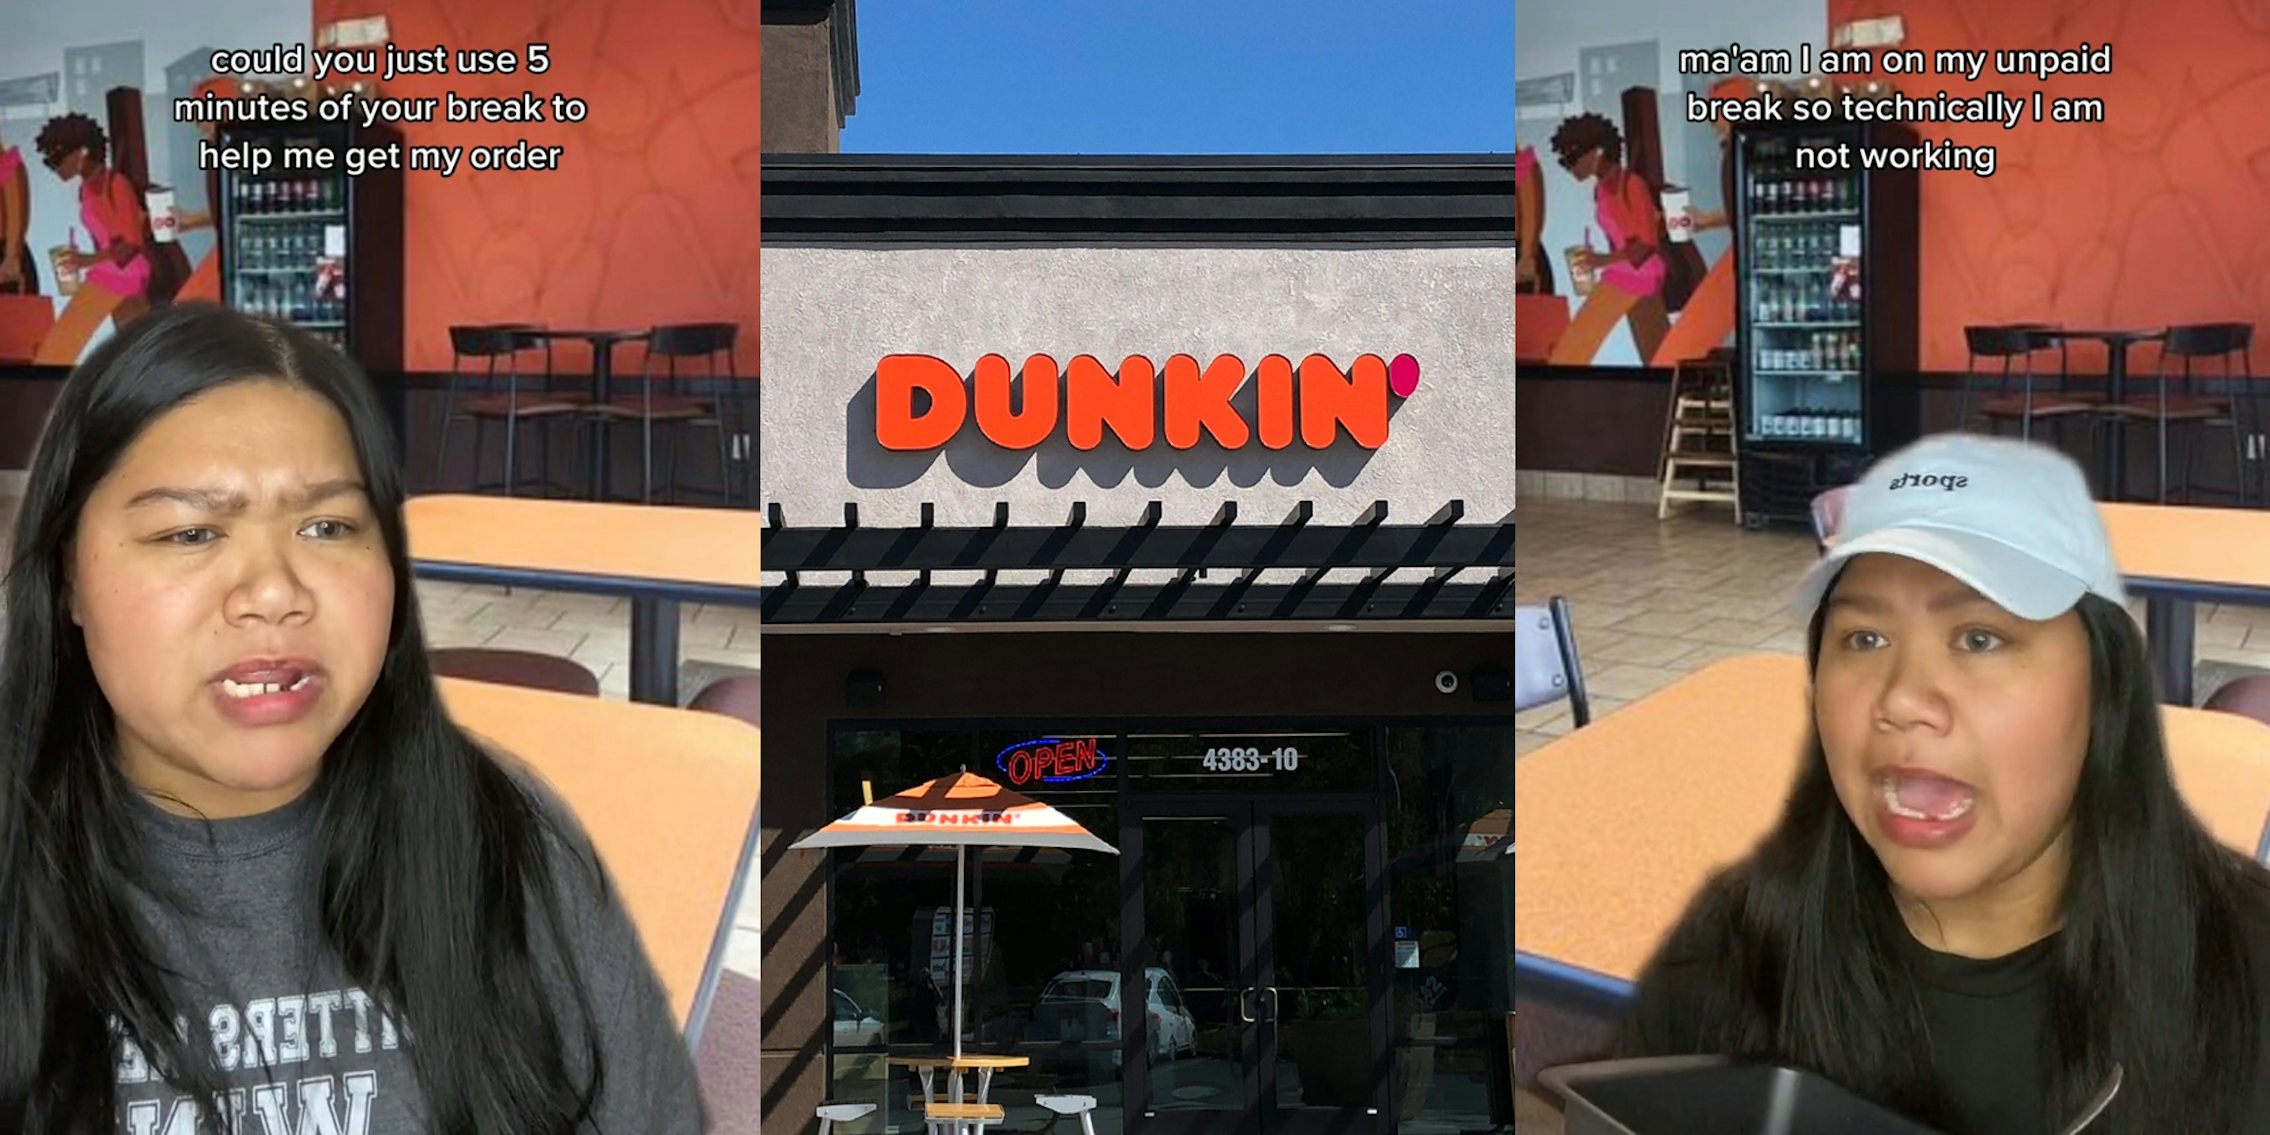 Dunkin' worker greenscreen TikTok over Dunkin' interior background with caption 'could you just use 5 minutes of your break to help me get my order' (l) Dunkin' building with sign (c) Dunkin' worker greenscreen TikTok over Dunkin' interior background with caption 'ma'am I am on my unpaid break so technically I am not working' (r)